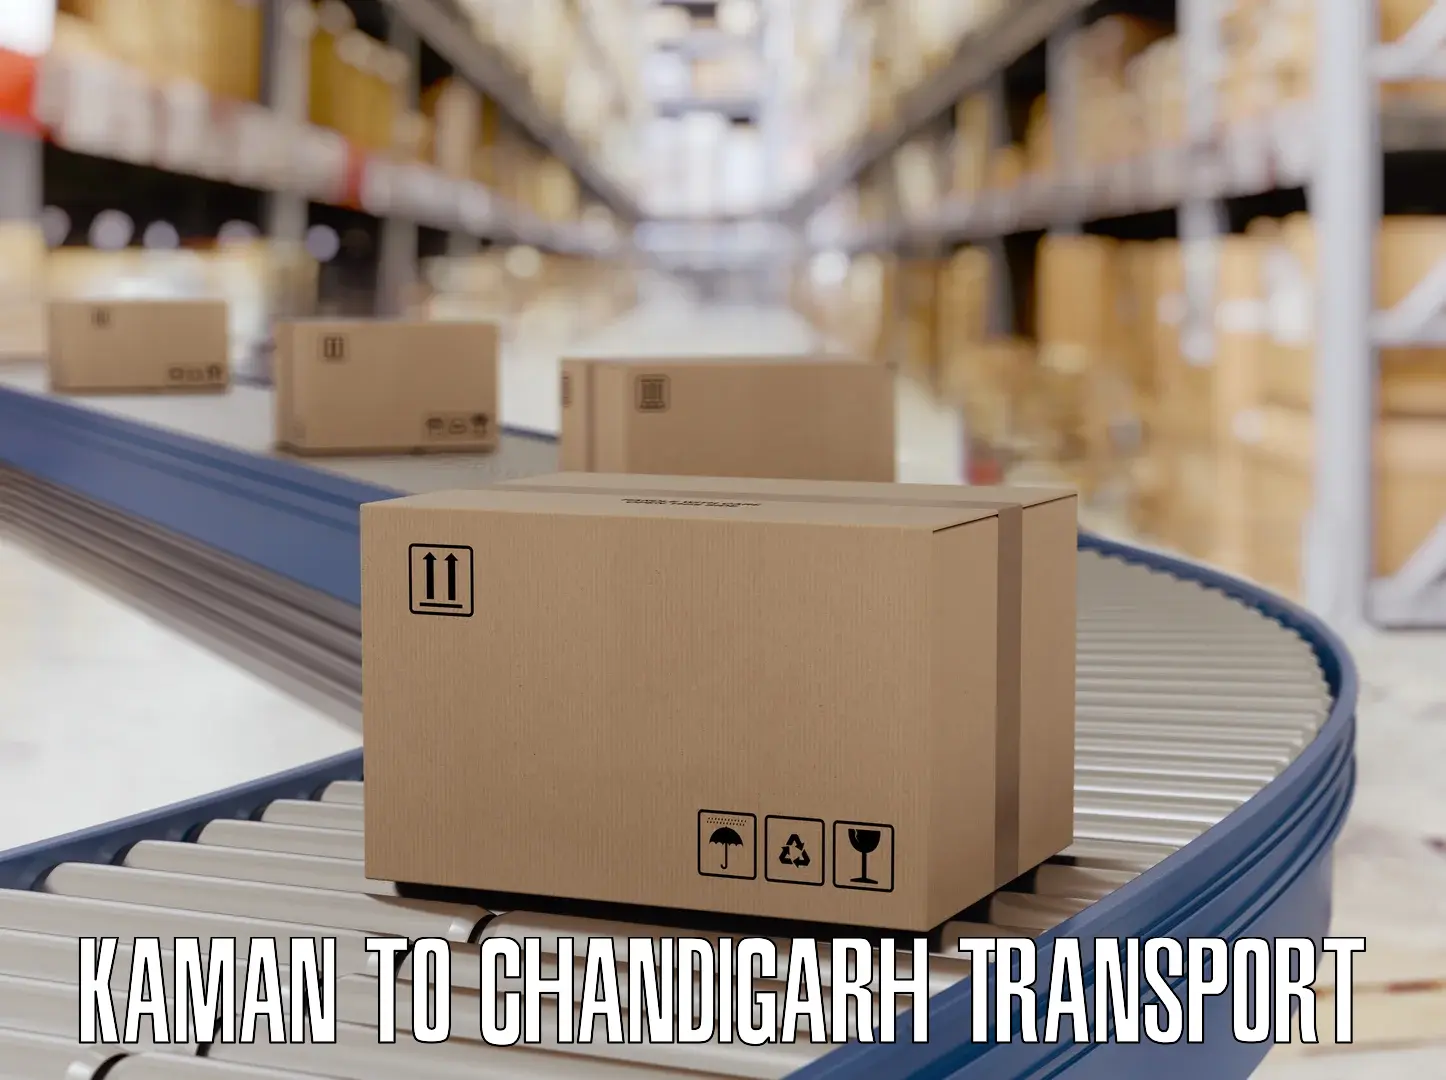 All India transport service Kaman to Chandigarh